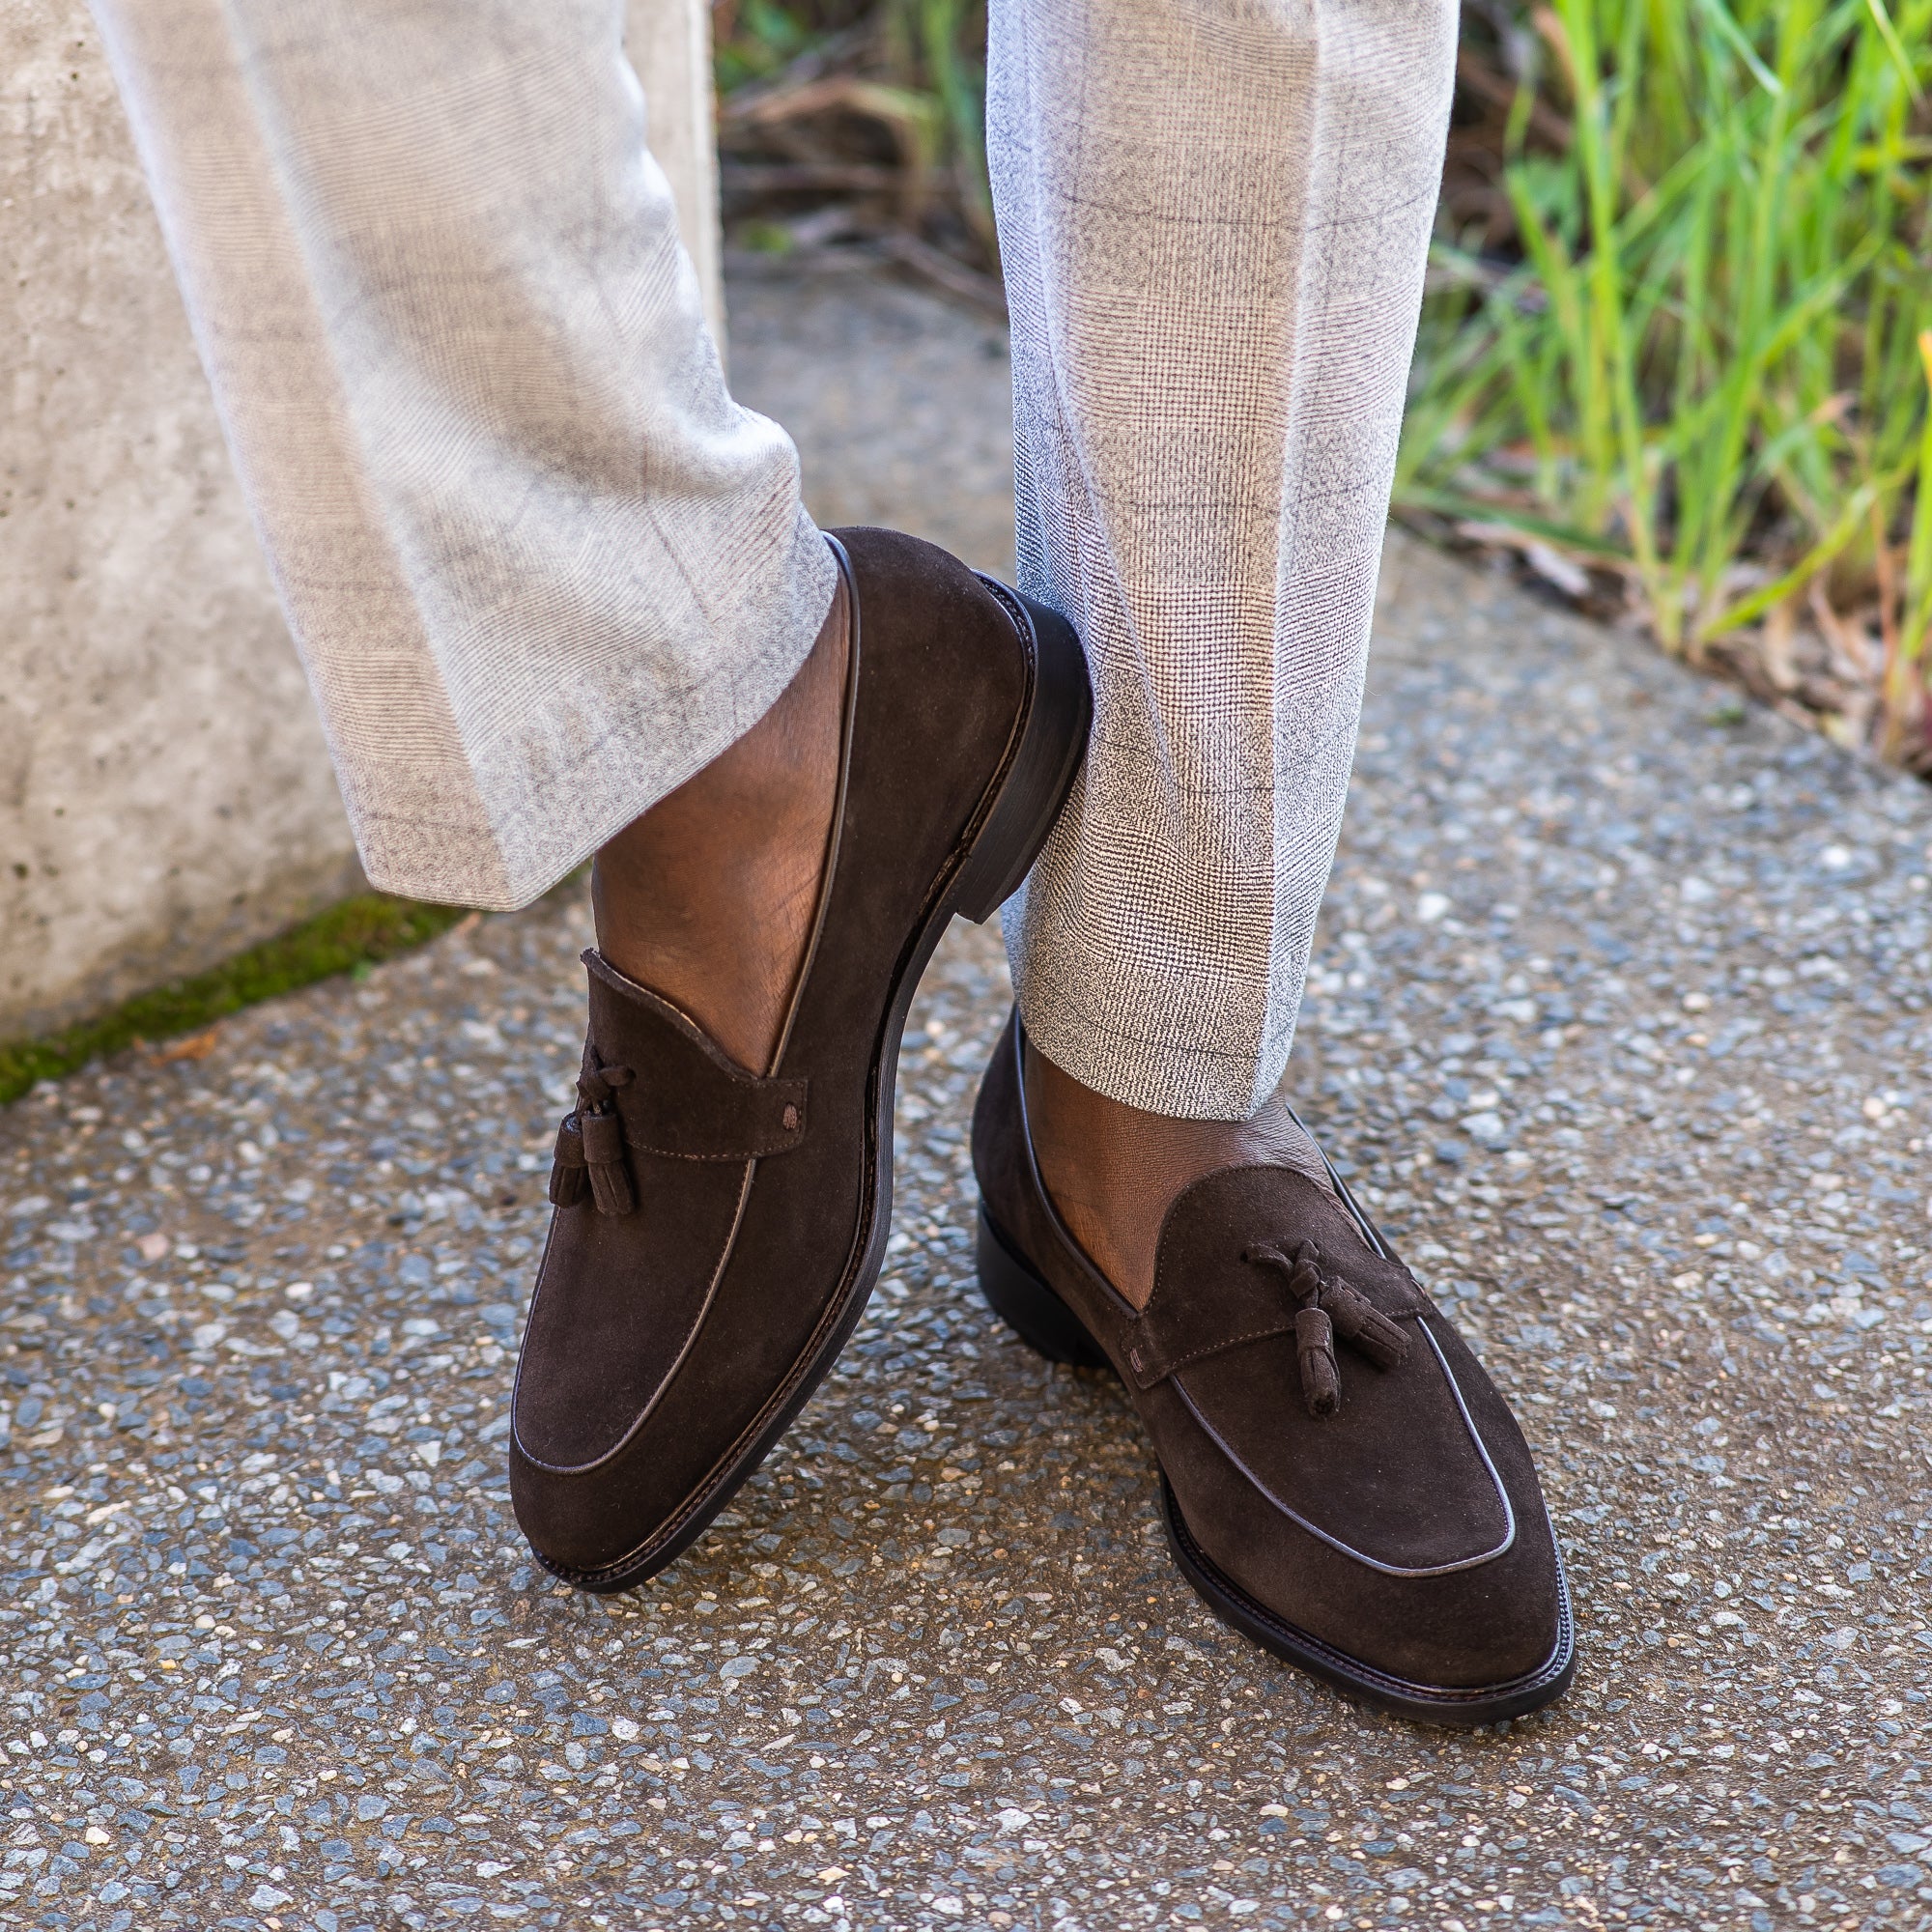 Tassel loafer in brown suede worn without socks